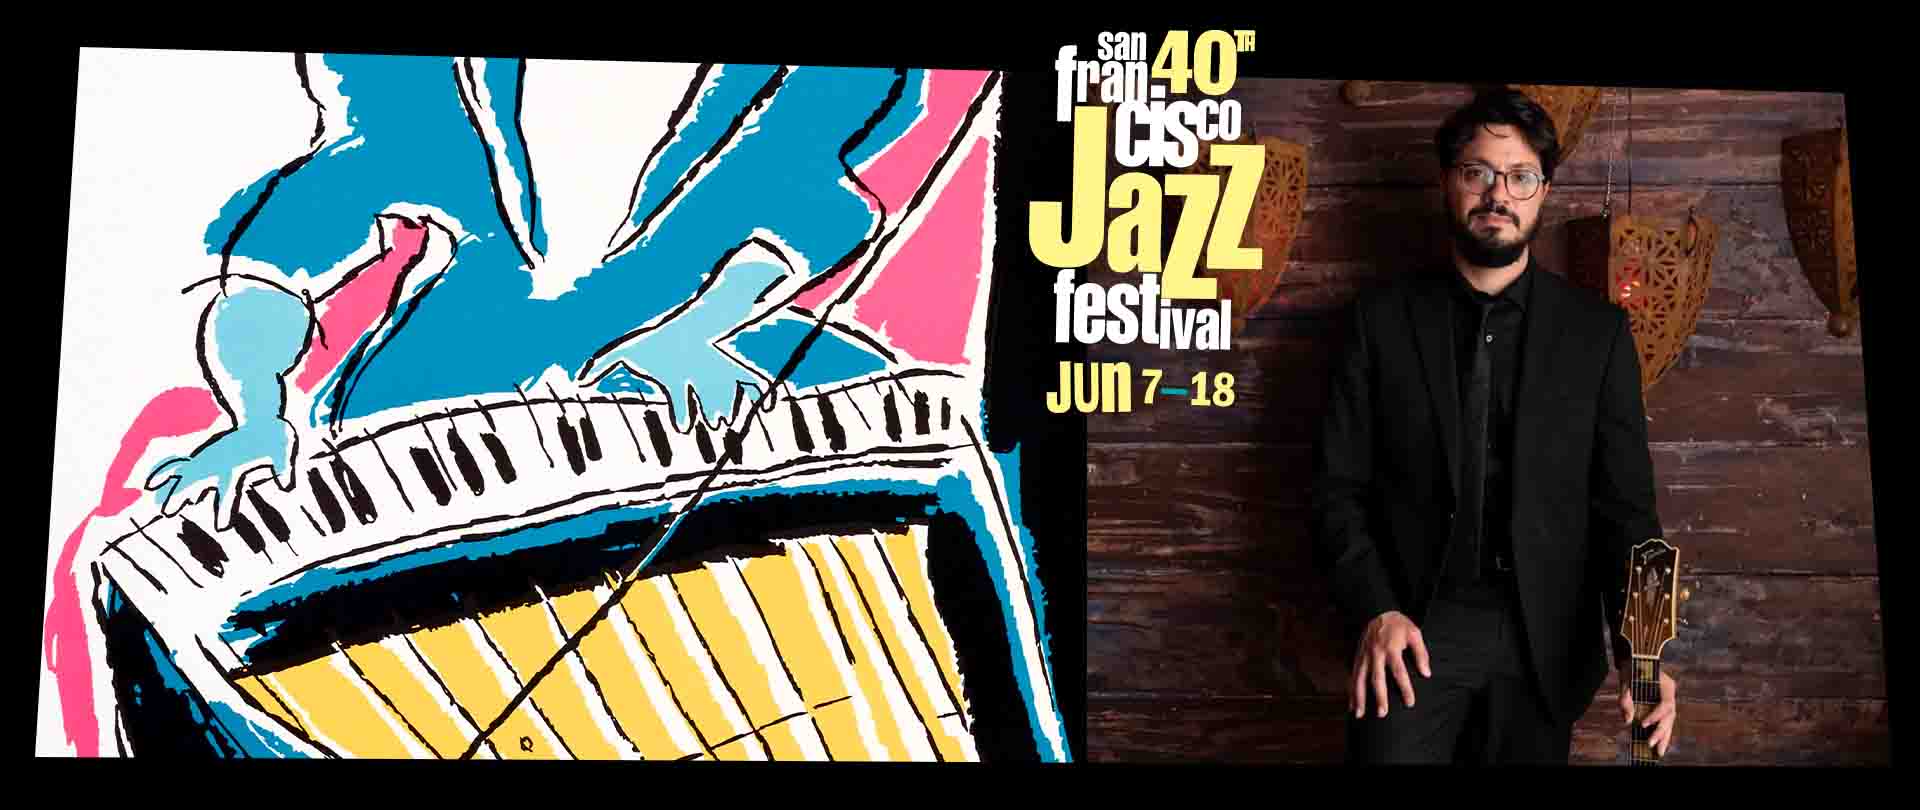 A photo of Pasquale Grasso with the 40th San Francisco Jazz Festival artwork